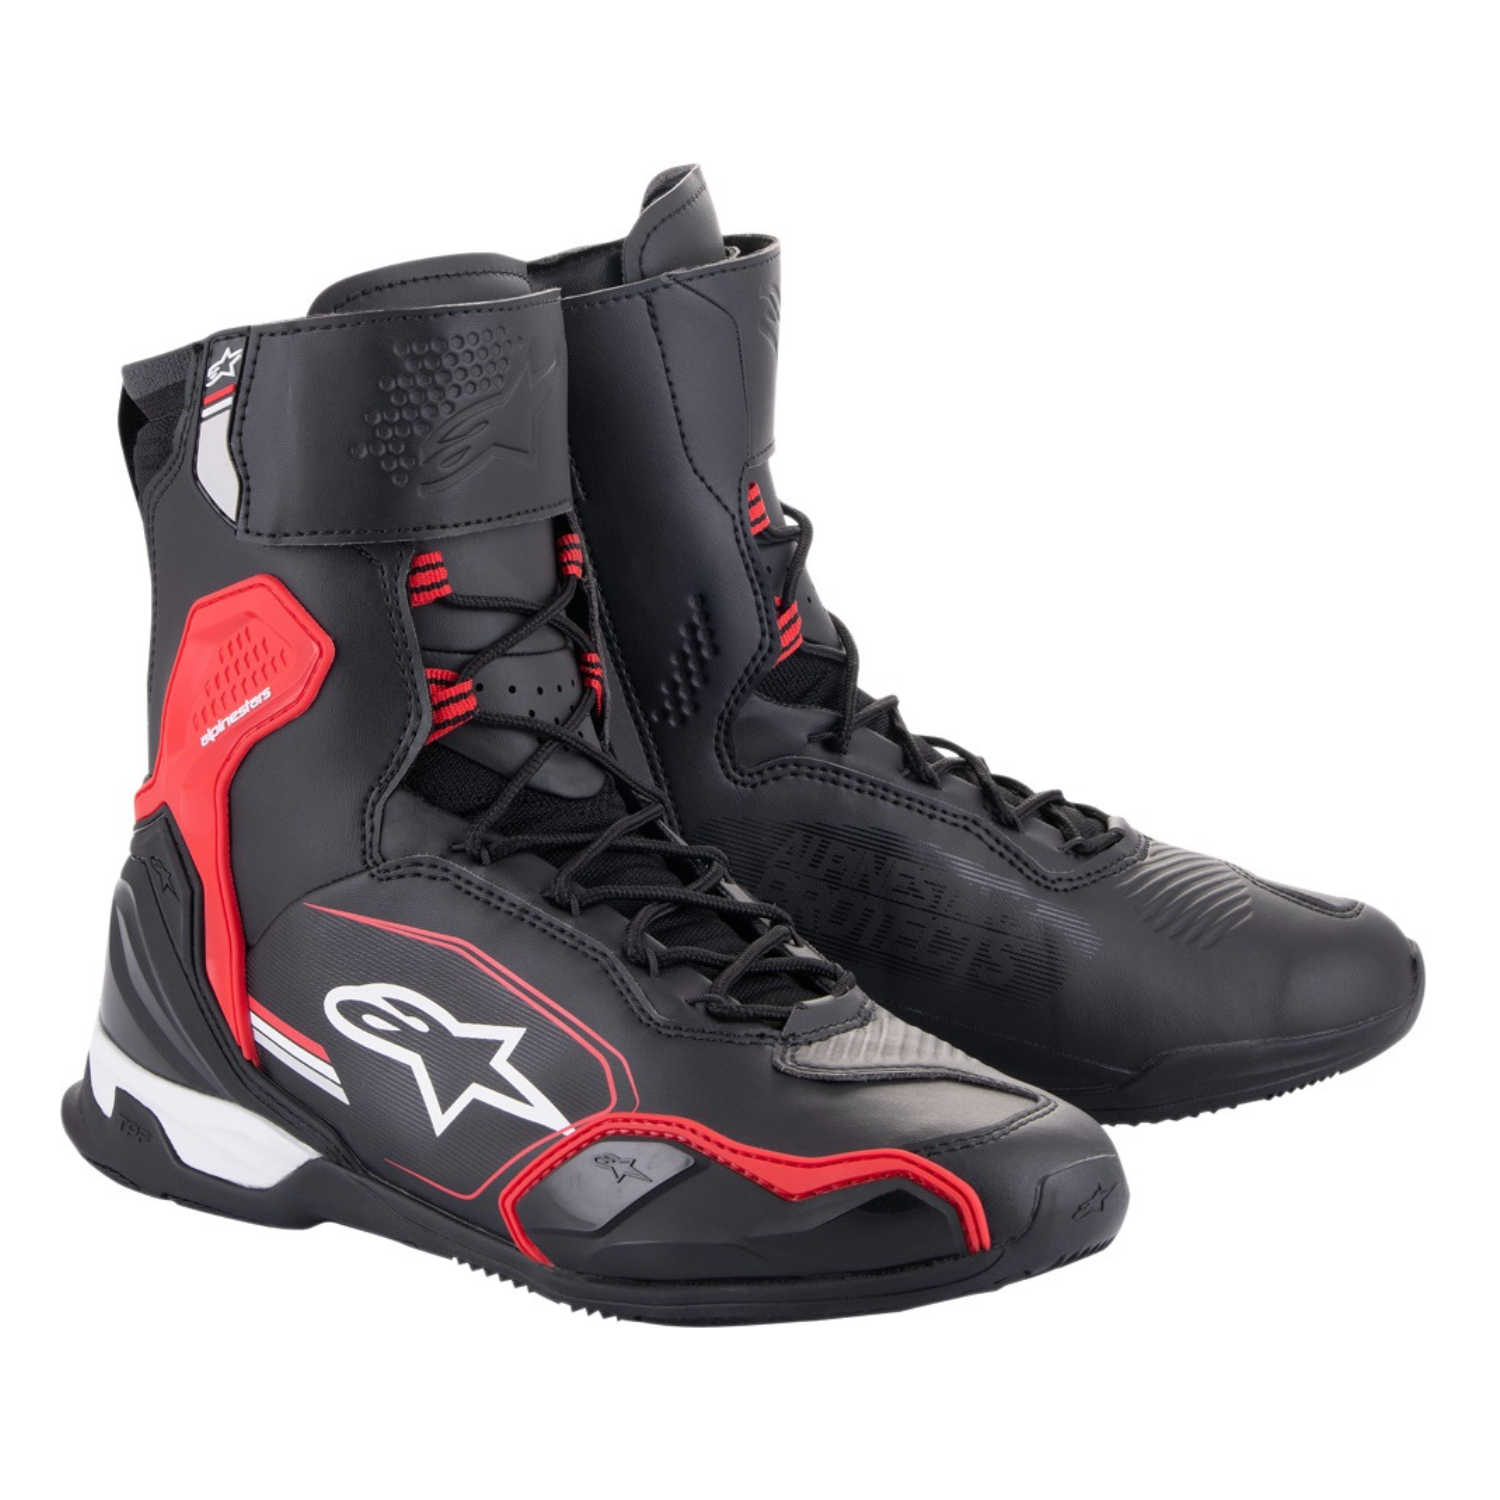 Image of Alpinestars Superfaster Shoes Black Bright Red White Taille US 12